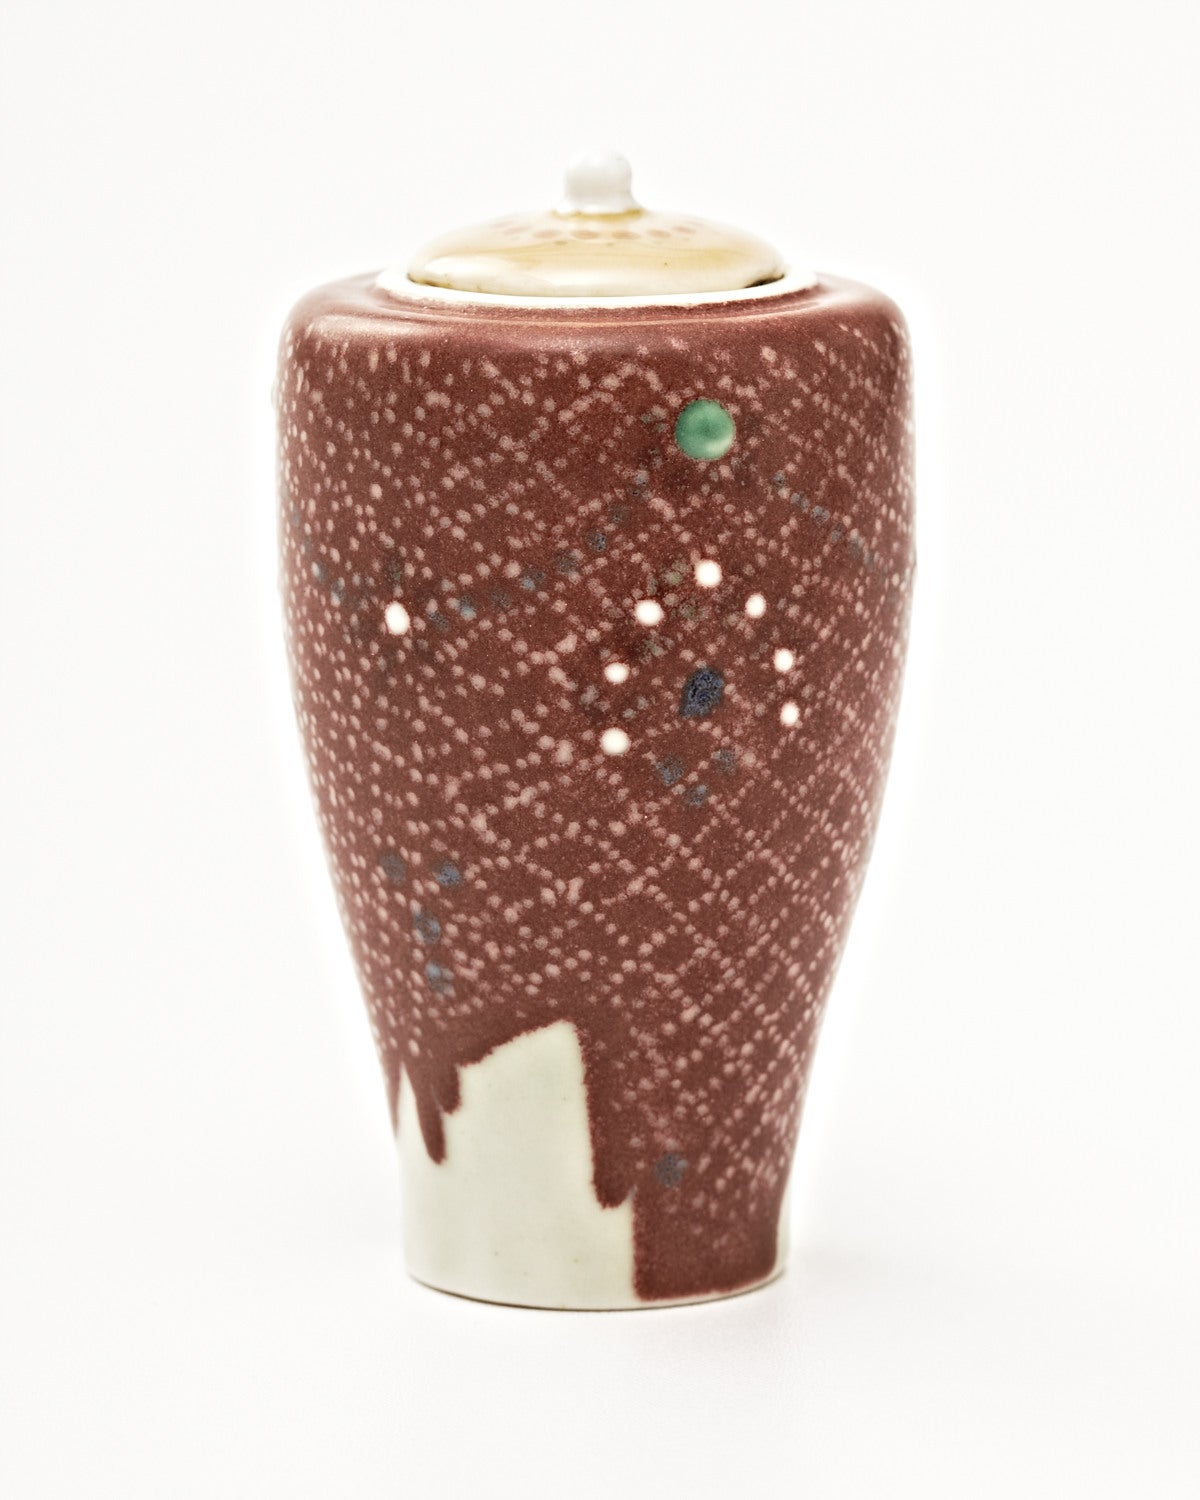 This petite lidded vase of elegant tapering form, is richly decorated with a thick dripping brown glaze which is covered in a delicately rendered, pointillistic grid-like a pattern. Further adorned with spots of green, white, and dark blue, the